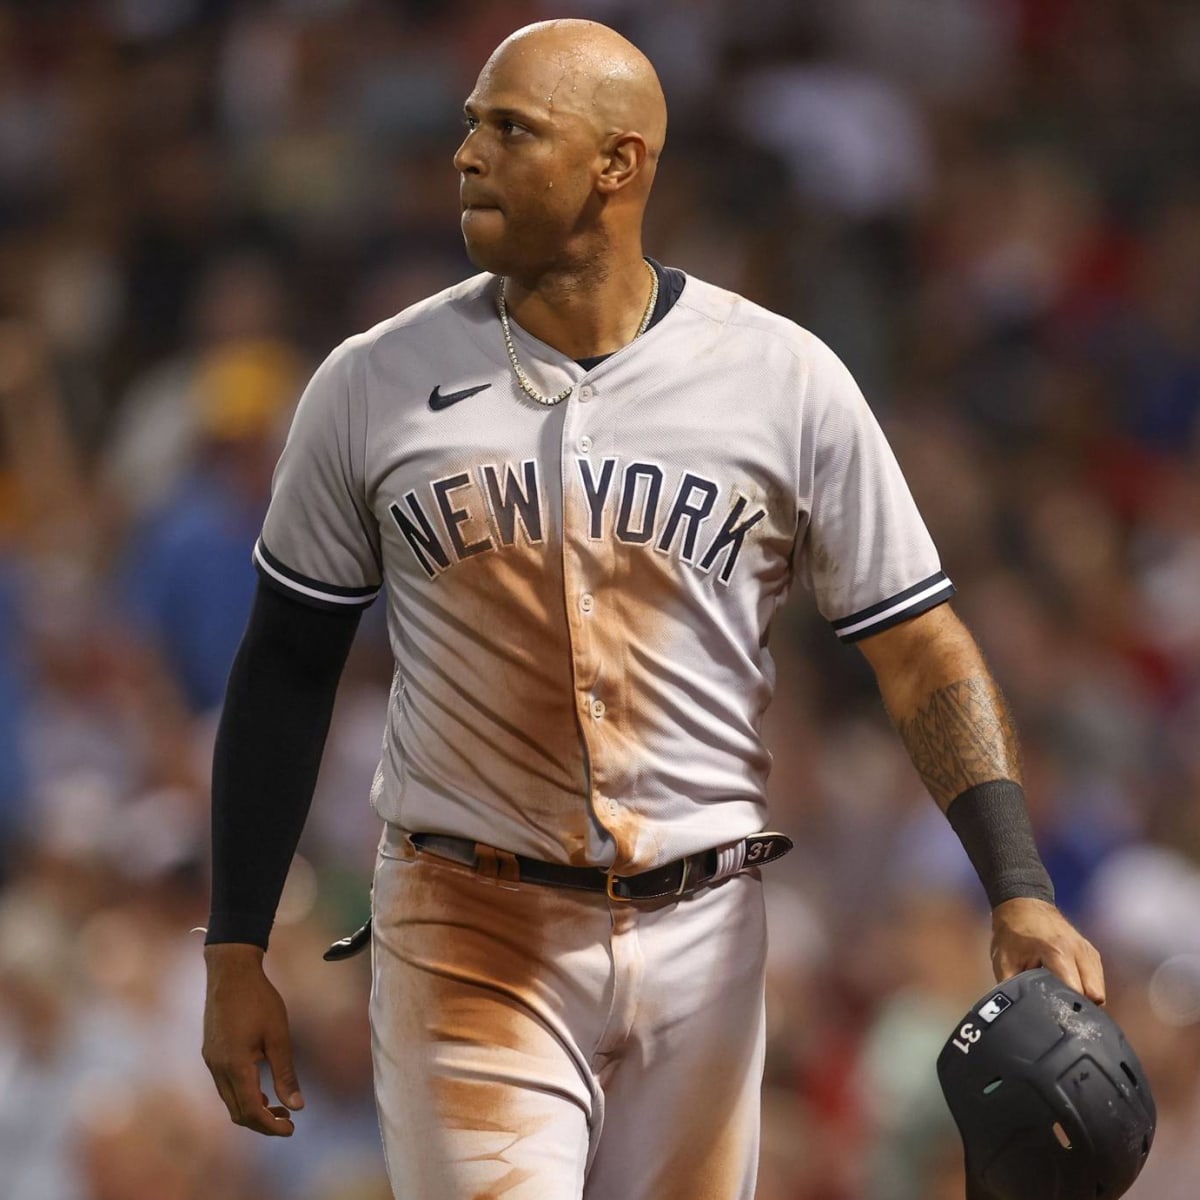 Yankees' Aaron Hicks Leaves Game 5 After Collision With Teammate